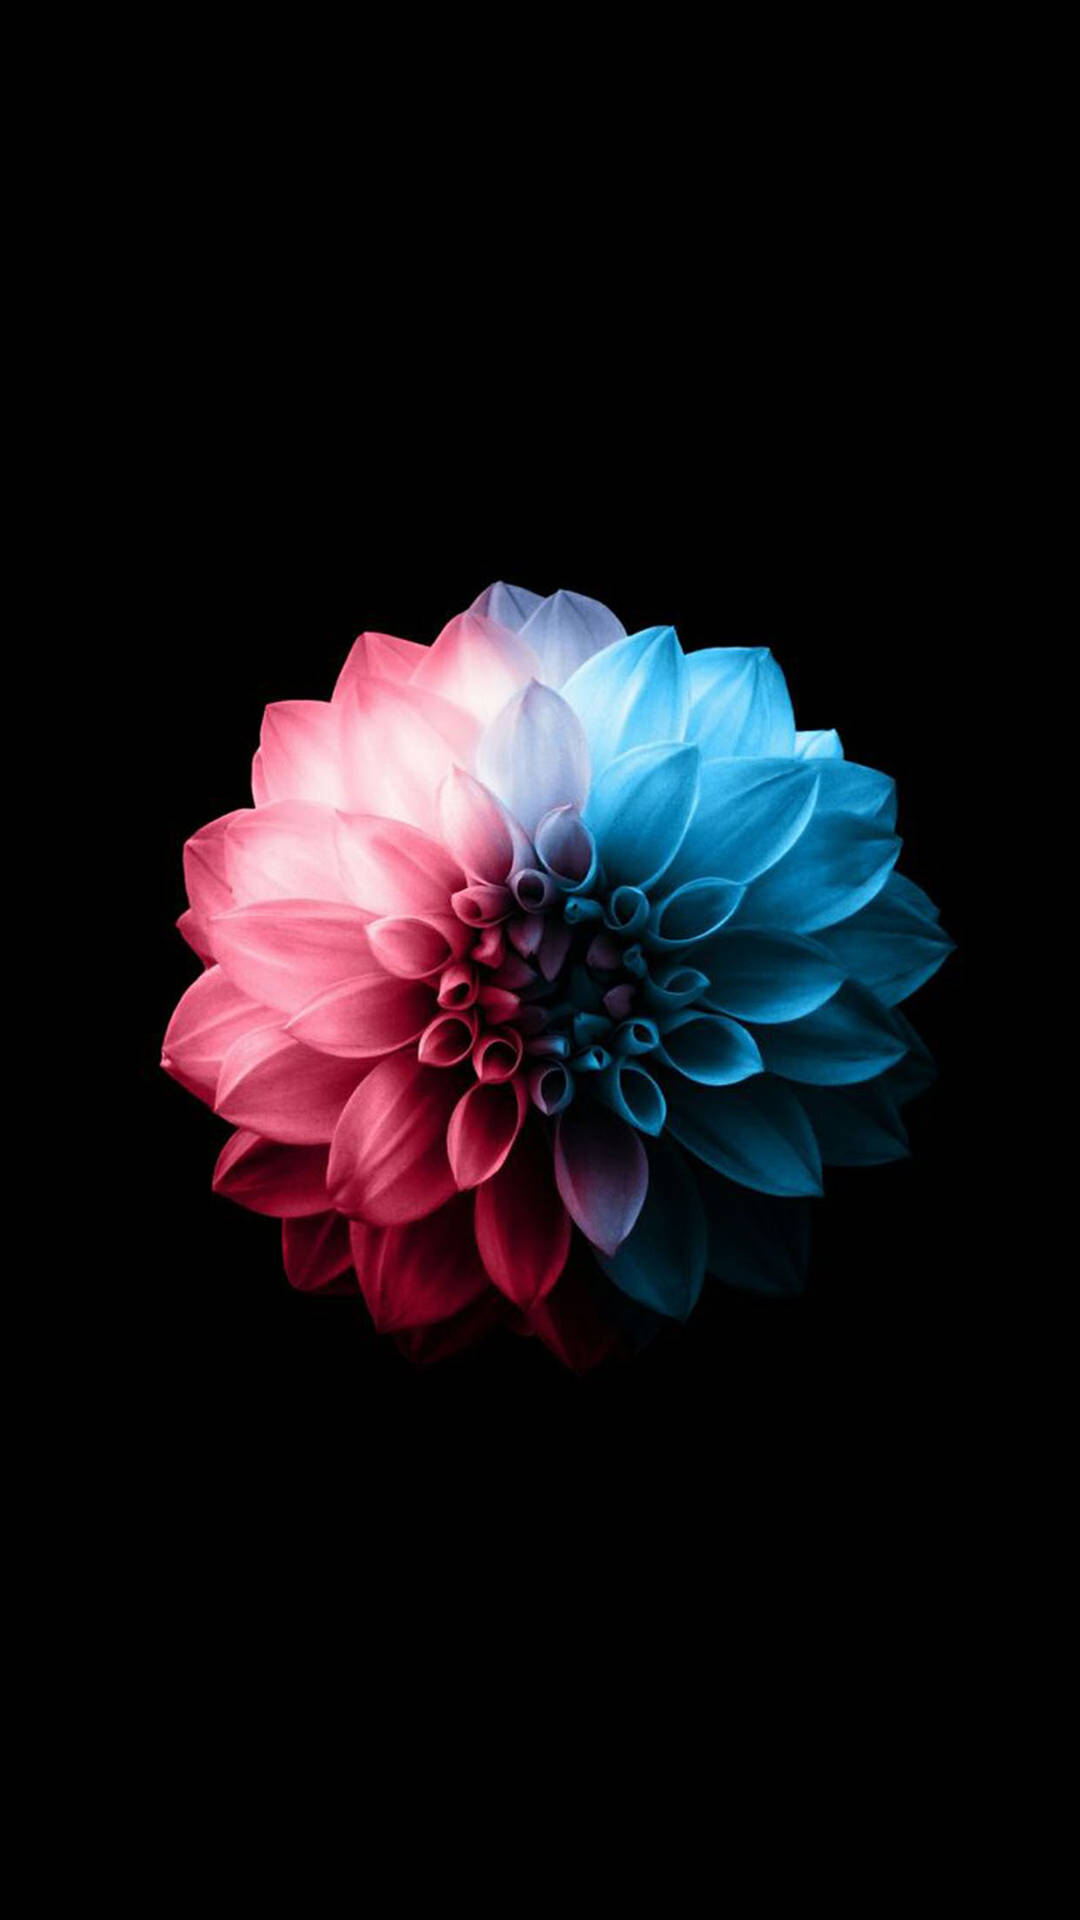 Red And Blue Dahlia Flower Apple Wallpaper